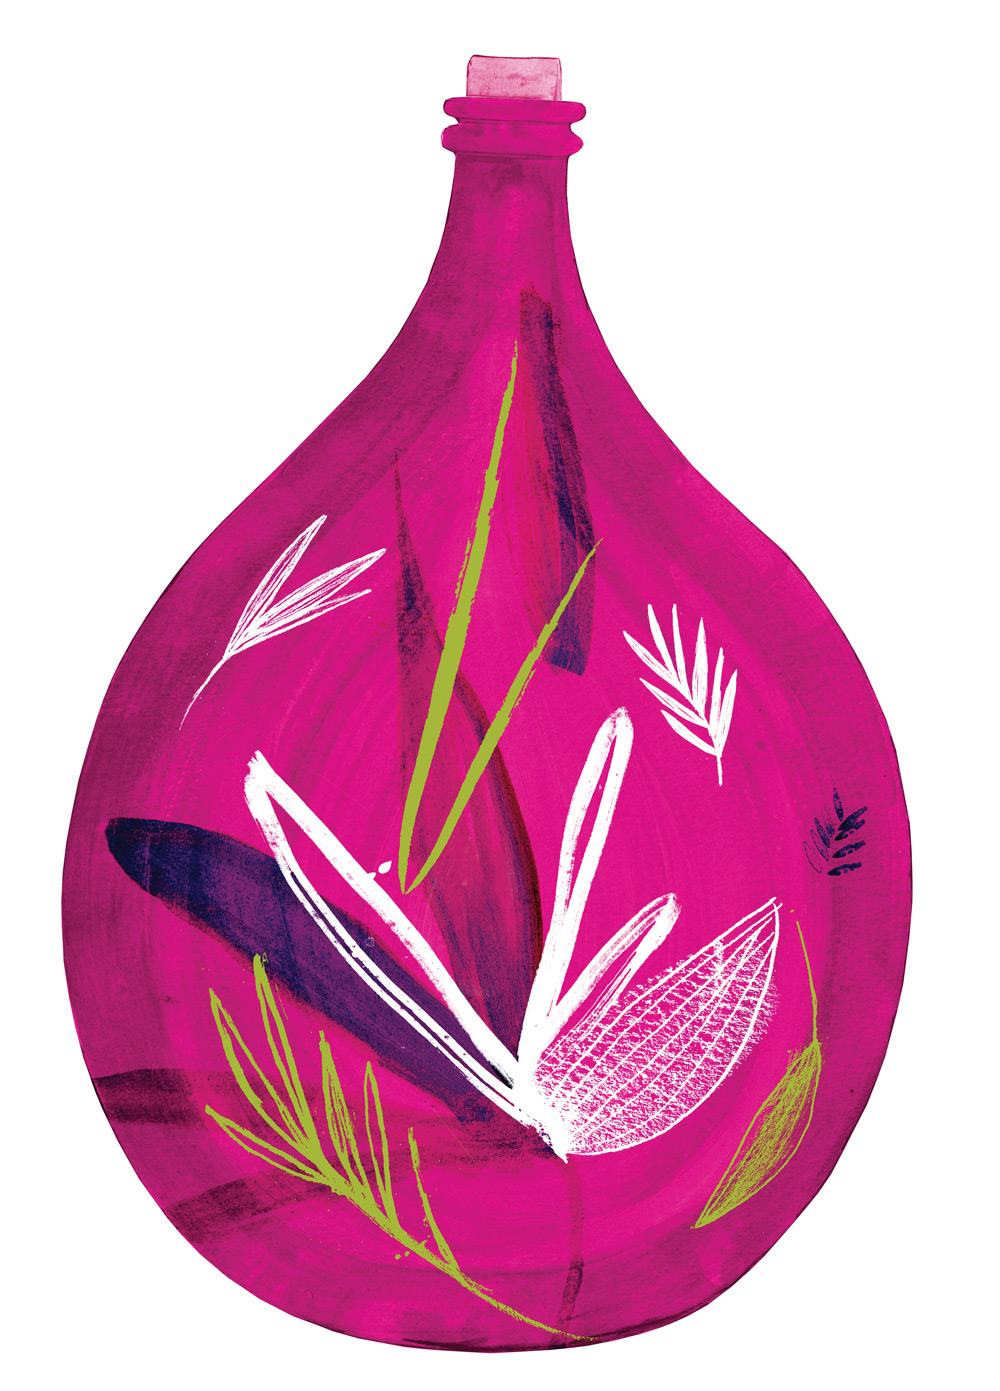 Made For life Organics Pink Demijohn hand painted illustration by Wild Bear Designs